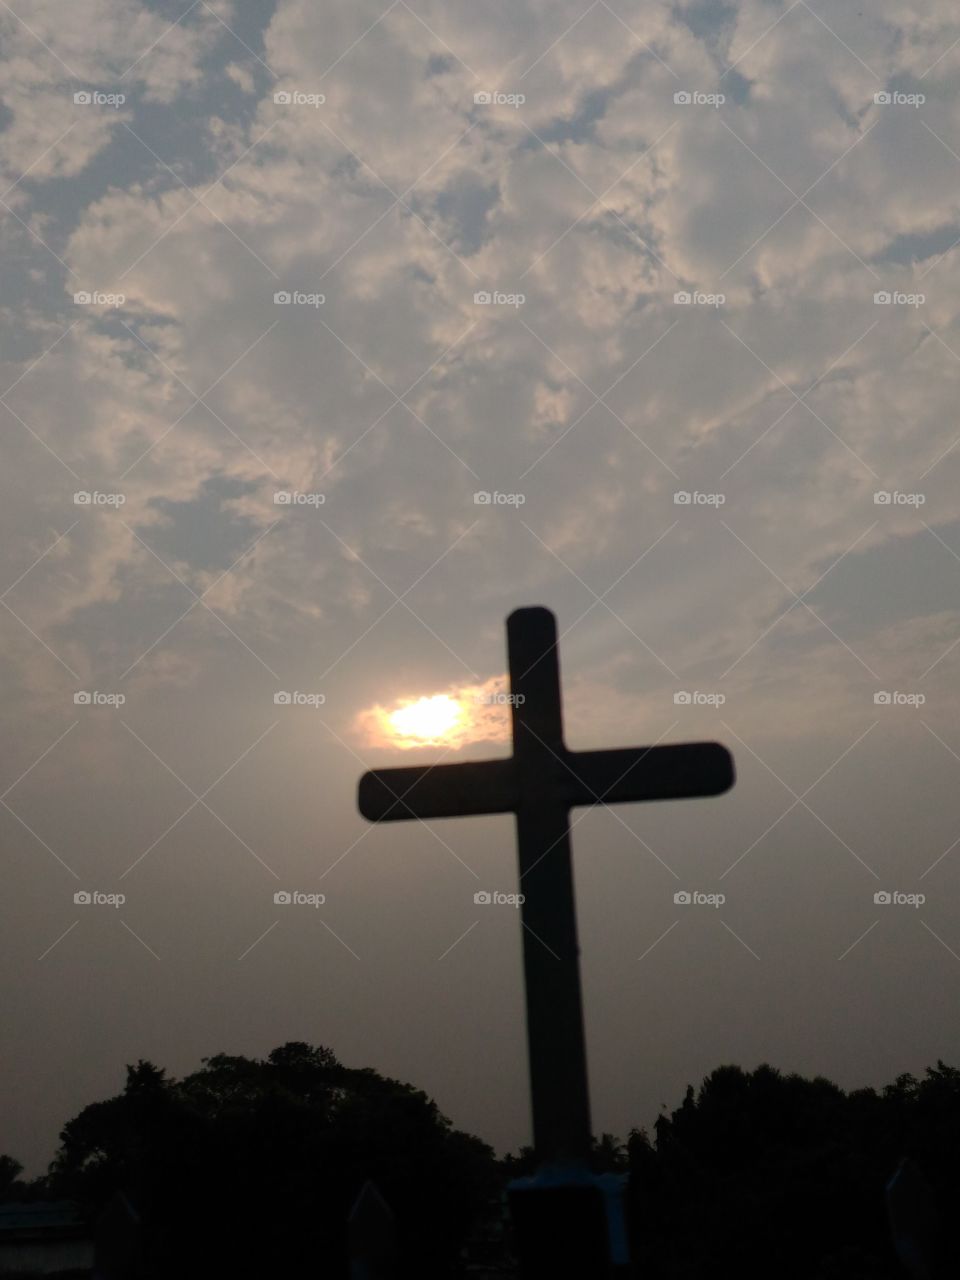 jesus is in there behind the cross..